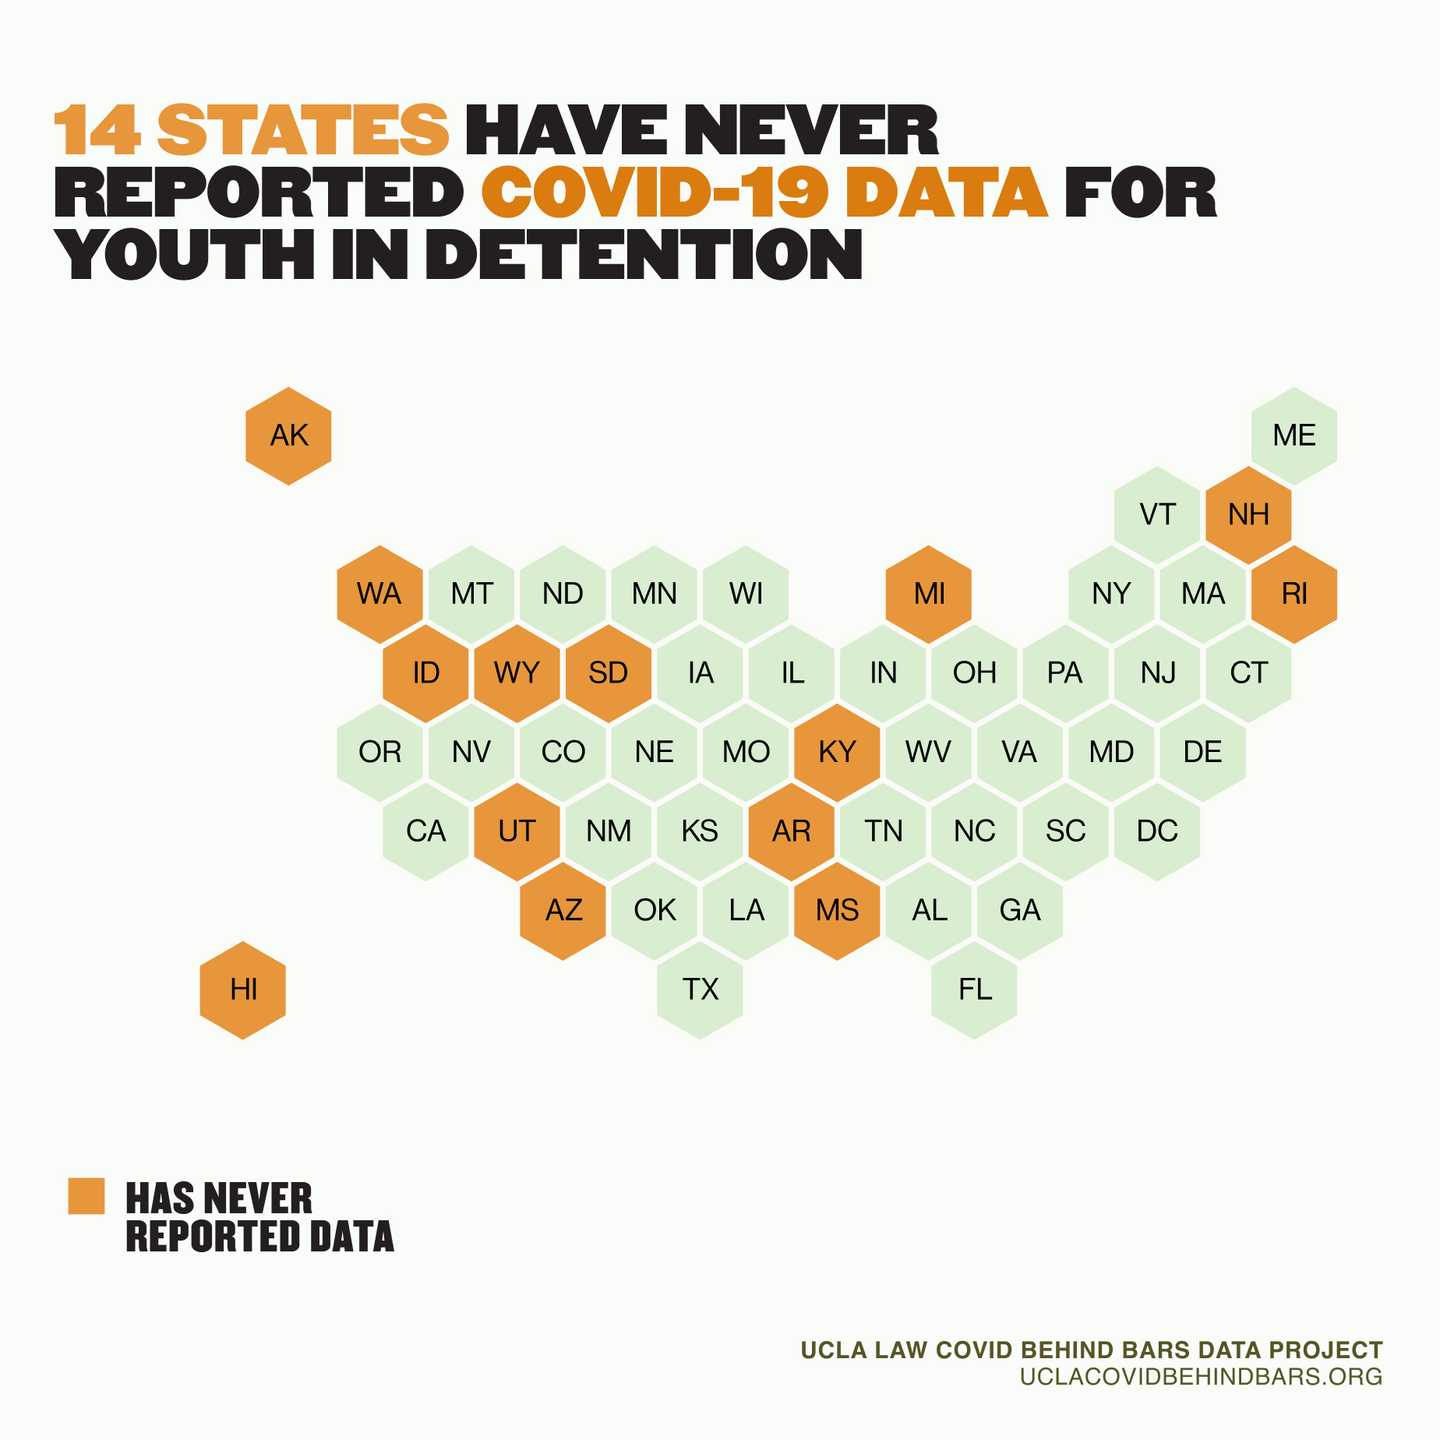 Map of United States showing that 14 states have never reported any COVID-19 data for youth in detention